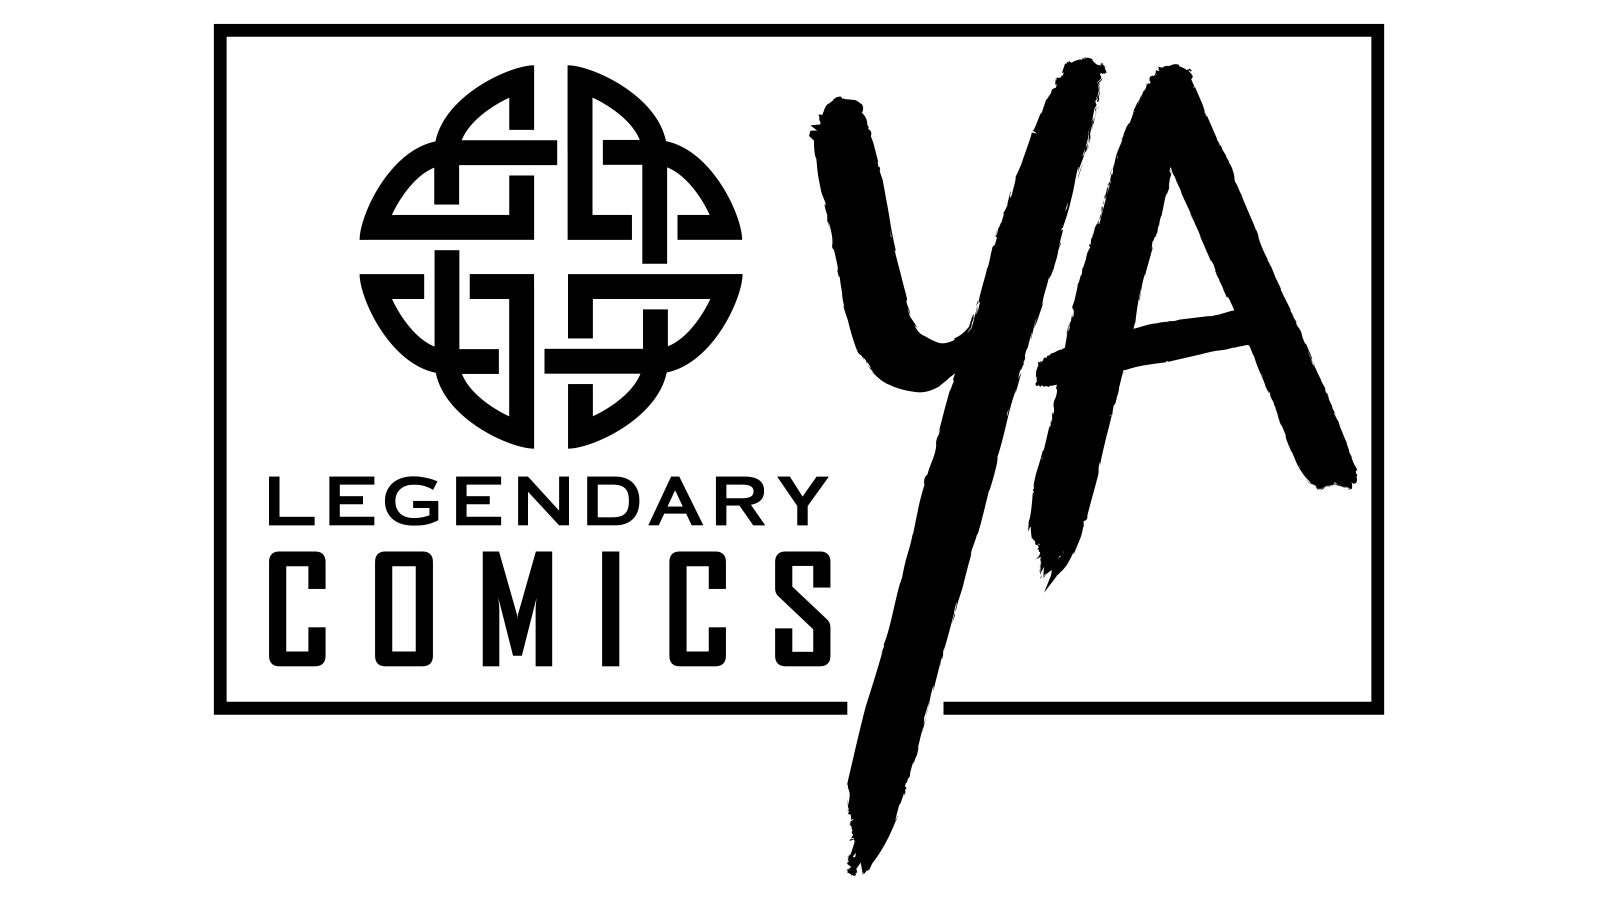 Legendary Comics Forms New Young Adult Imprint Featuring Impressive Slate of Upcoming Original Graphic Novels